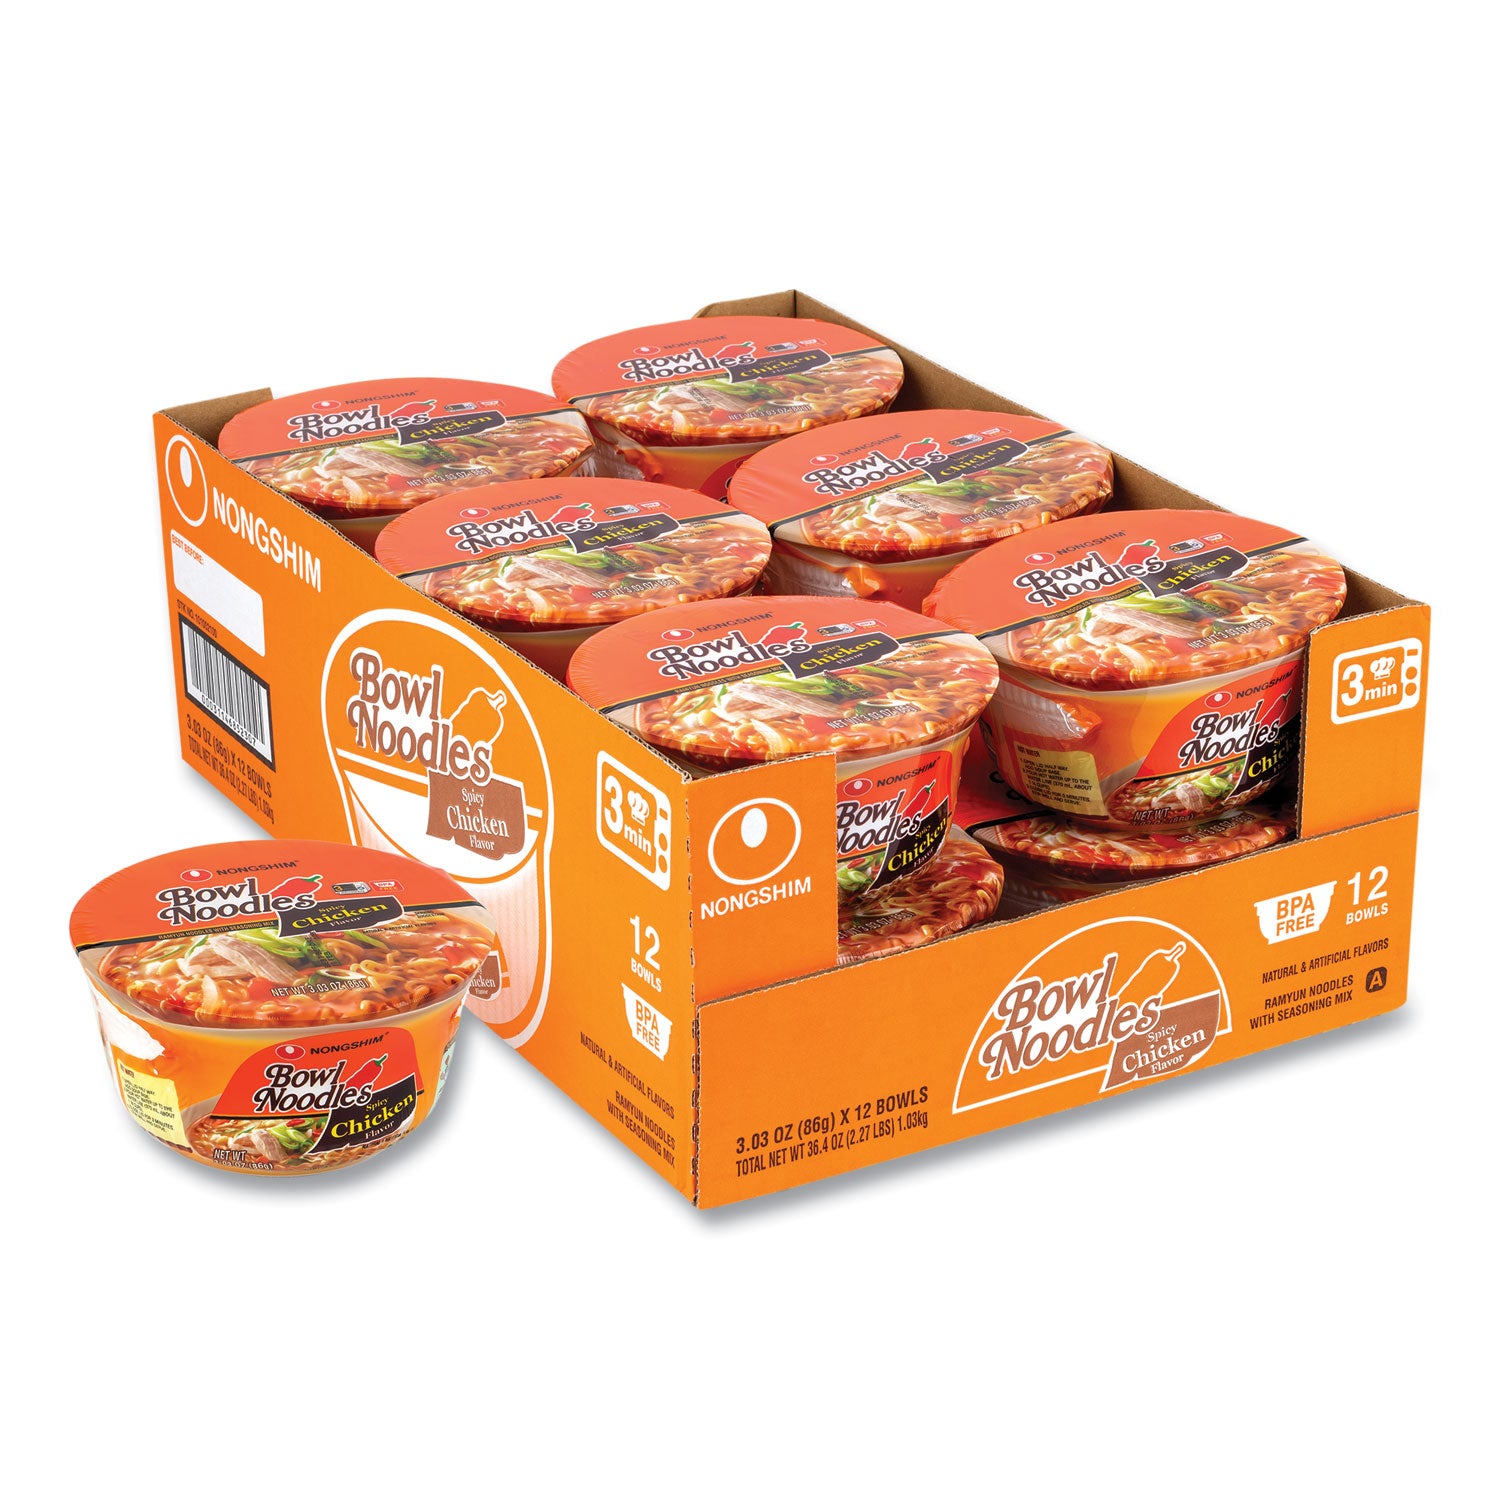 spicy-chicken-bowl-noodle-soup-chicken-303-oz-cup-12-carton-ships-in-1-3-business-days_grr22002163 - 1